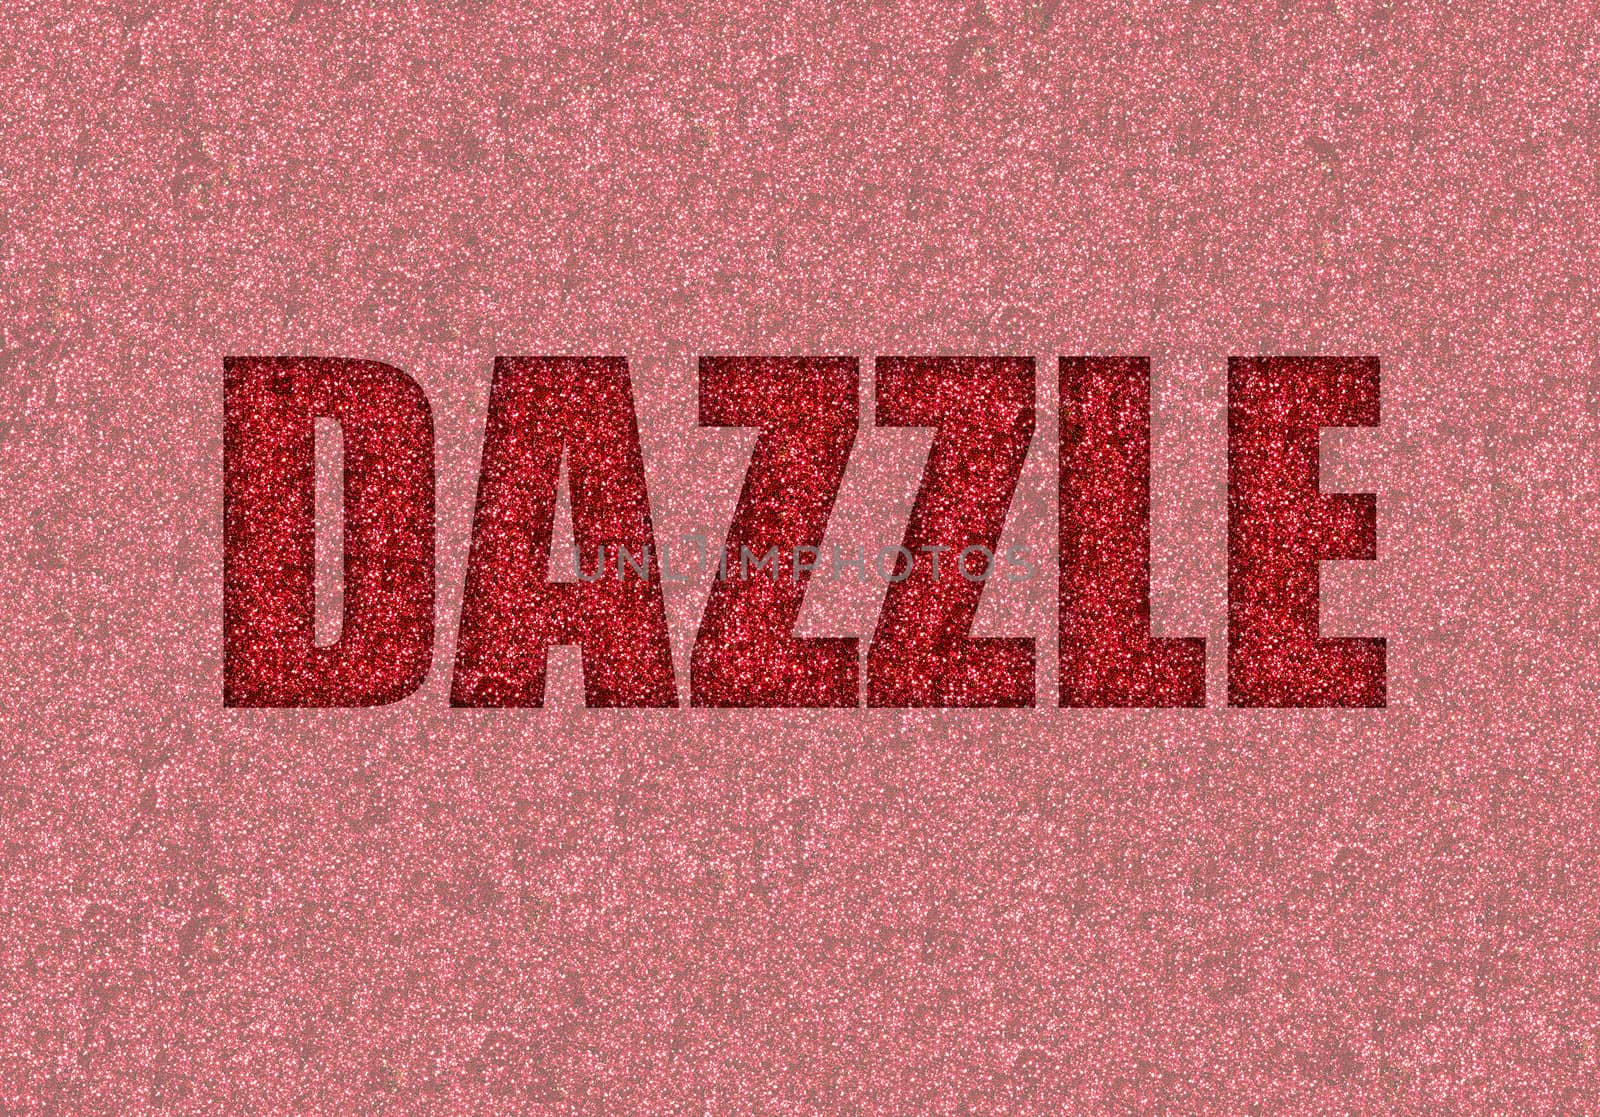 dazzle written in red glitter on shimmering background